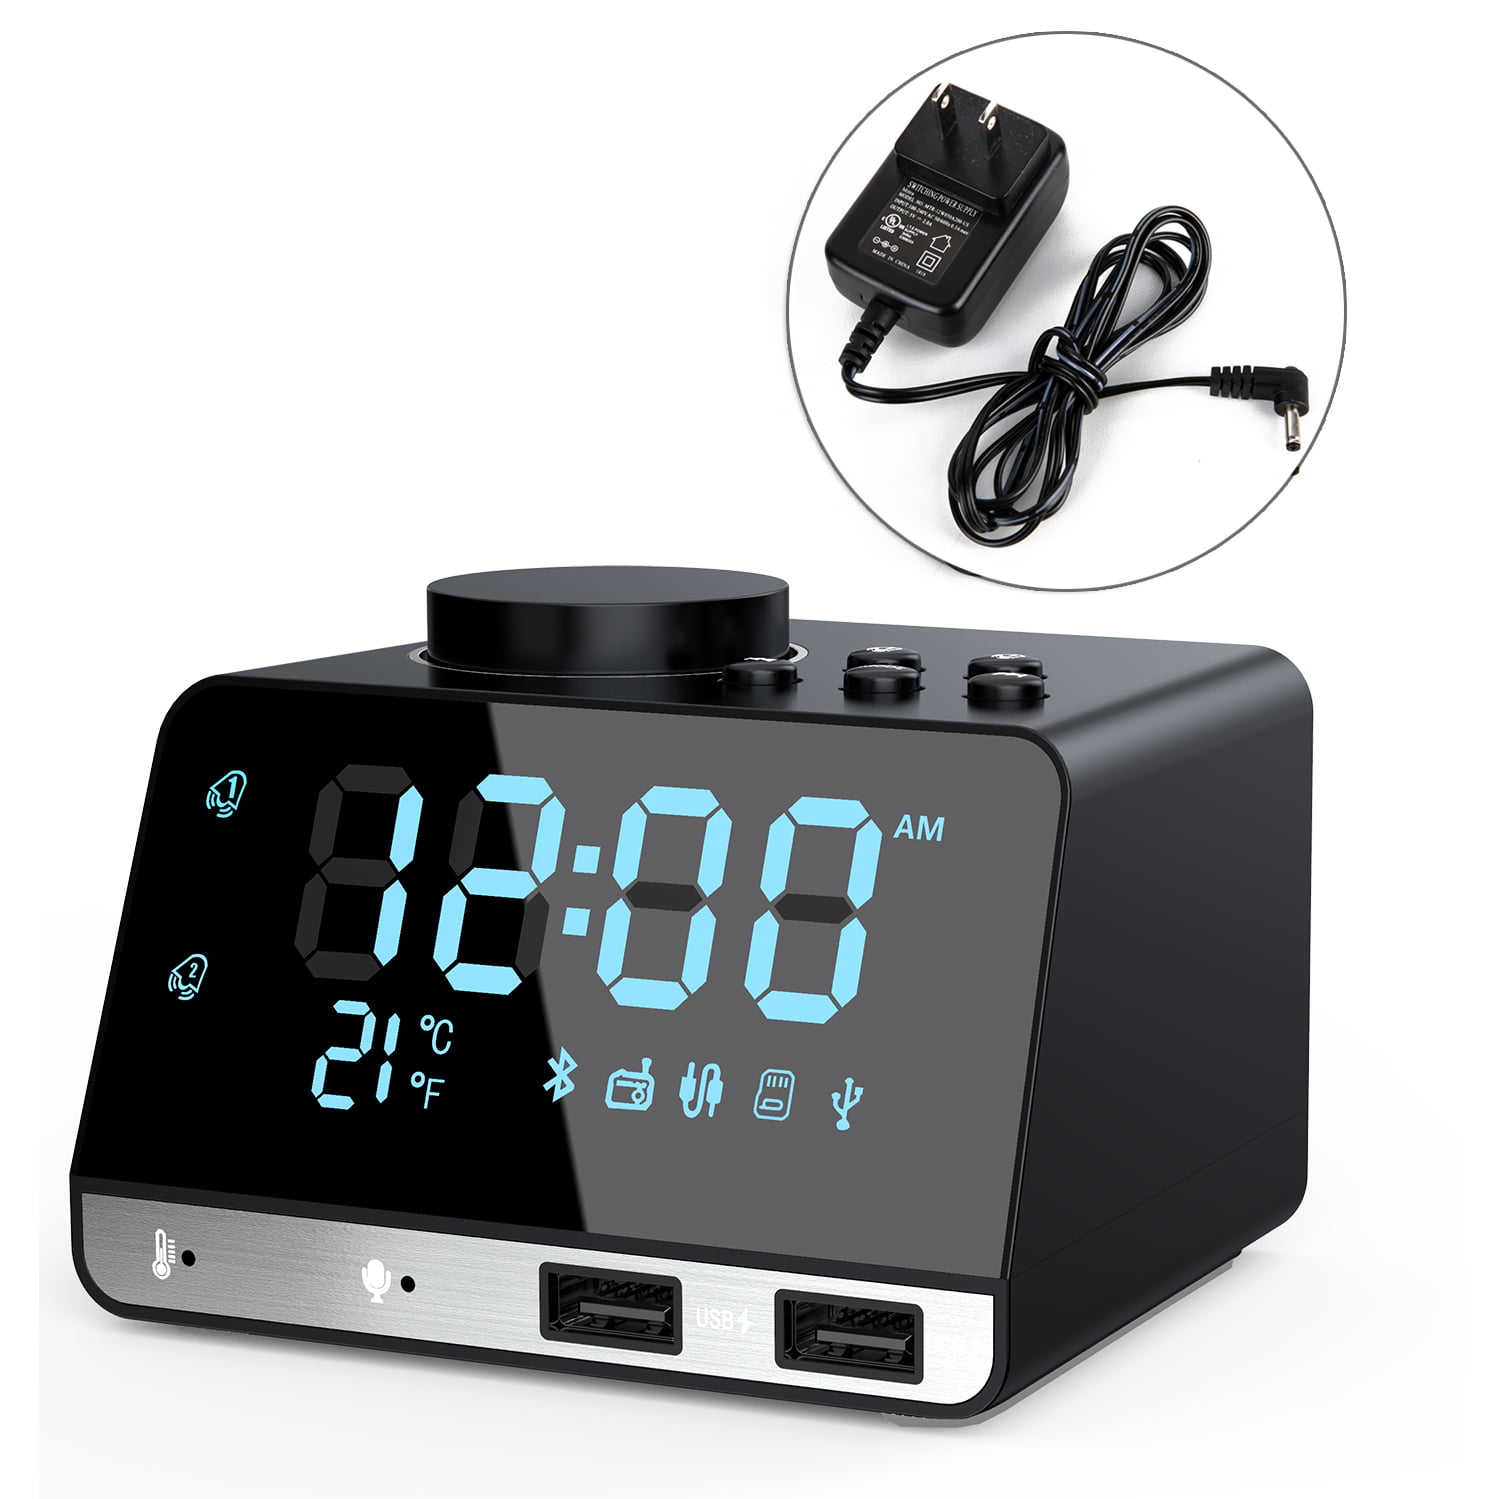 White Sleep Timer,USB Charging Port Clock Radio Bluetooth V5.0 Portable Speaker with HD Sound and Bass,1.4 Inch Blue Display with Dimmer,Dual Alarm,Snooze,Backup Battery,Adjustable Alarm Volume 